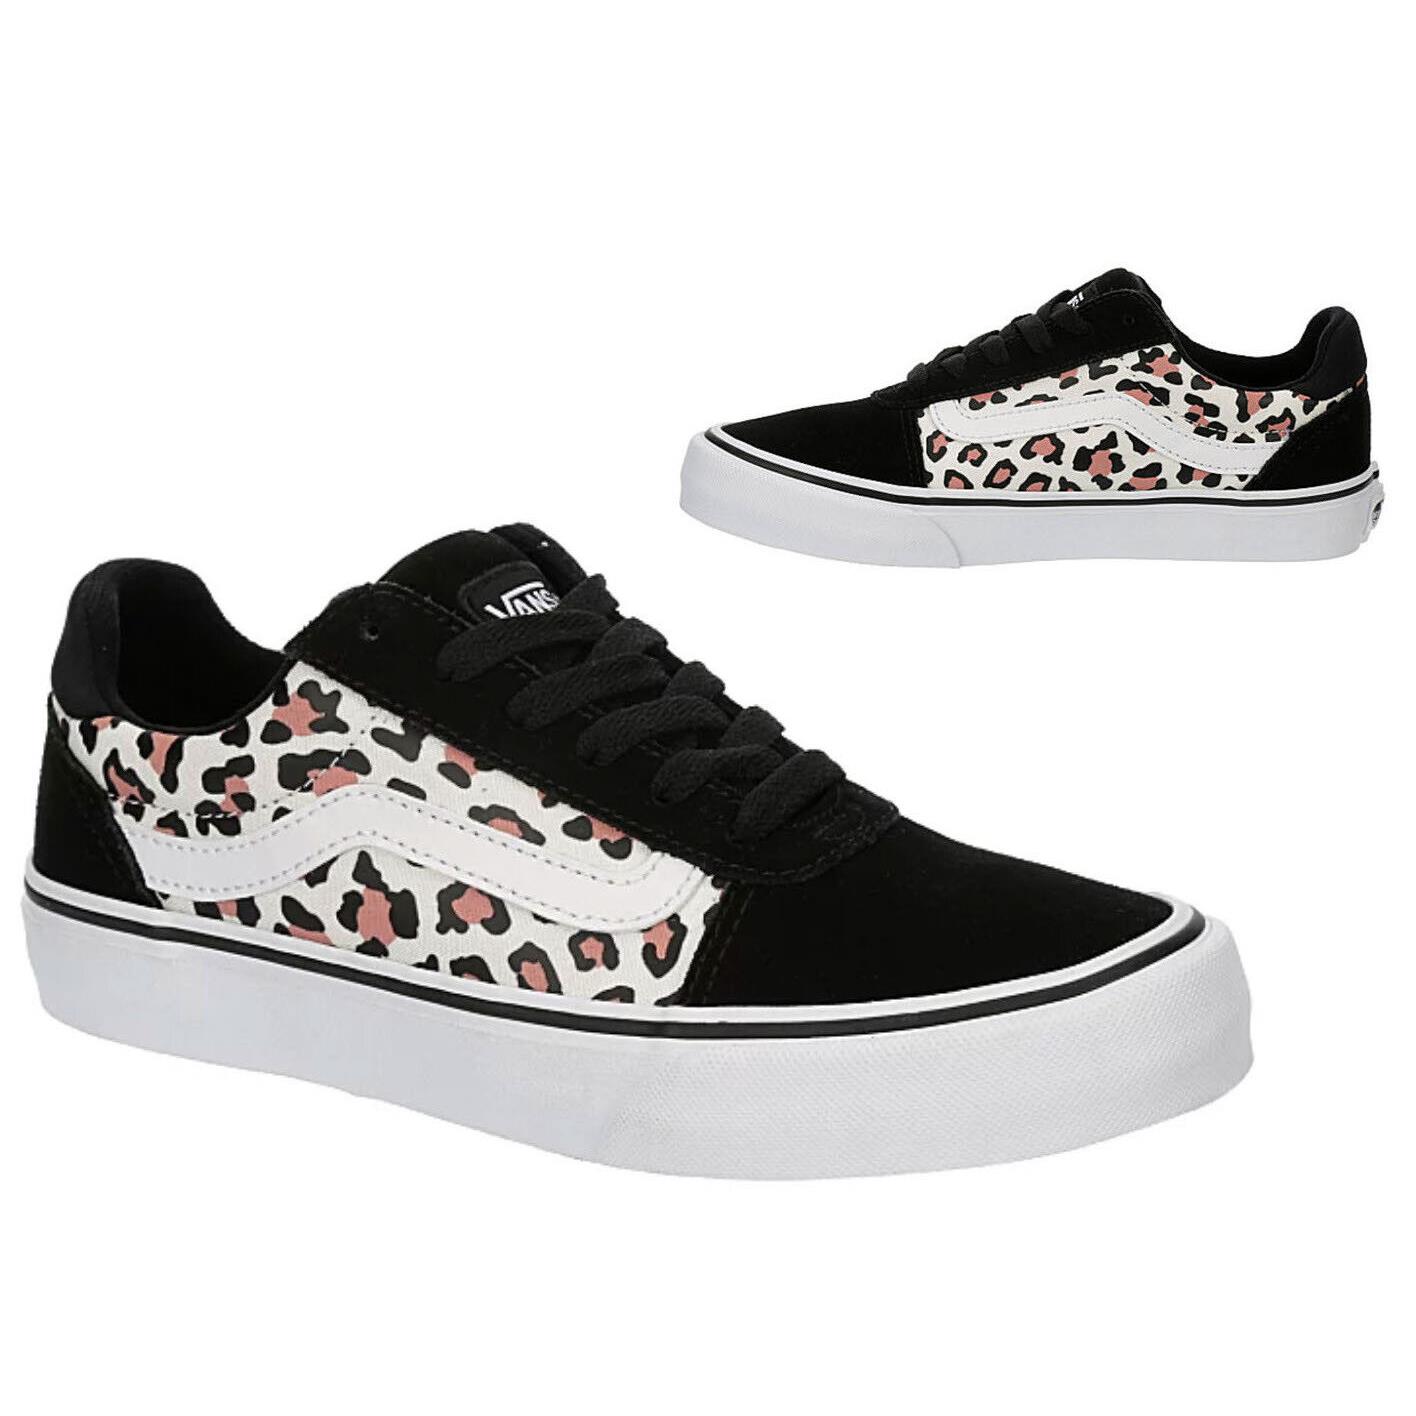 Vans Leopard Ward Casual Womens Sneakers Shoes Black Blush All Sizes